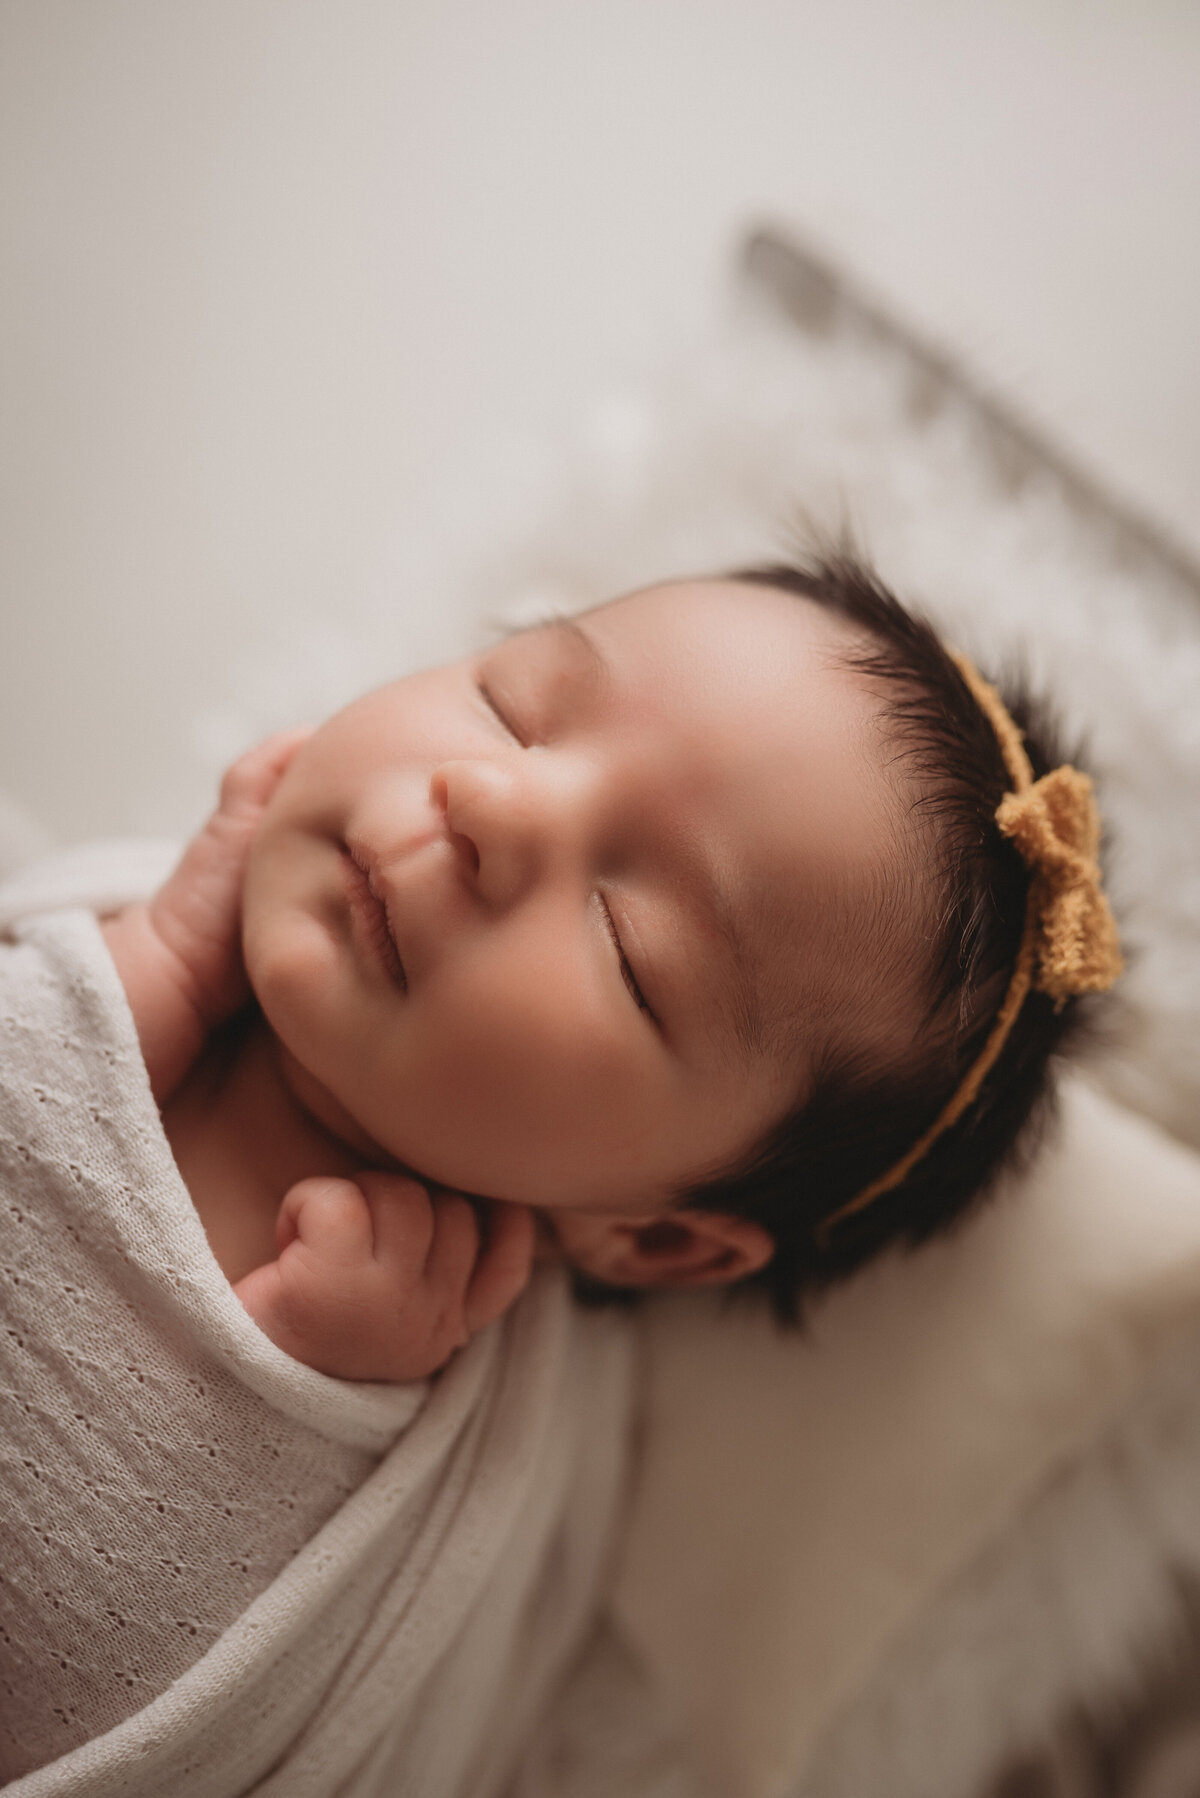 Smyrna, GA newborn photographer photographed sleeping newborn girl with hands on cheeks, dressed in off white swaddle and yellow headband with bow